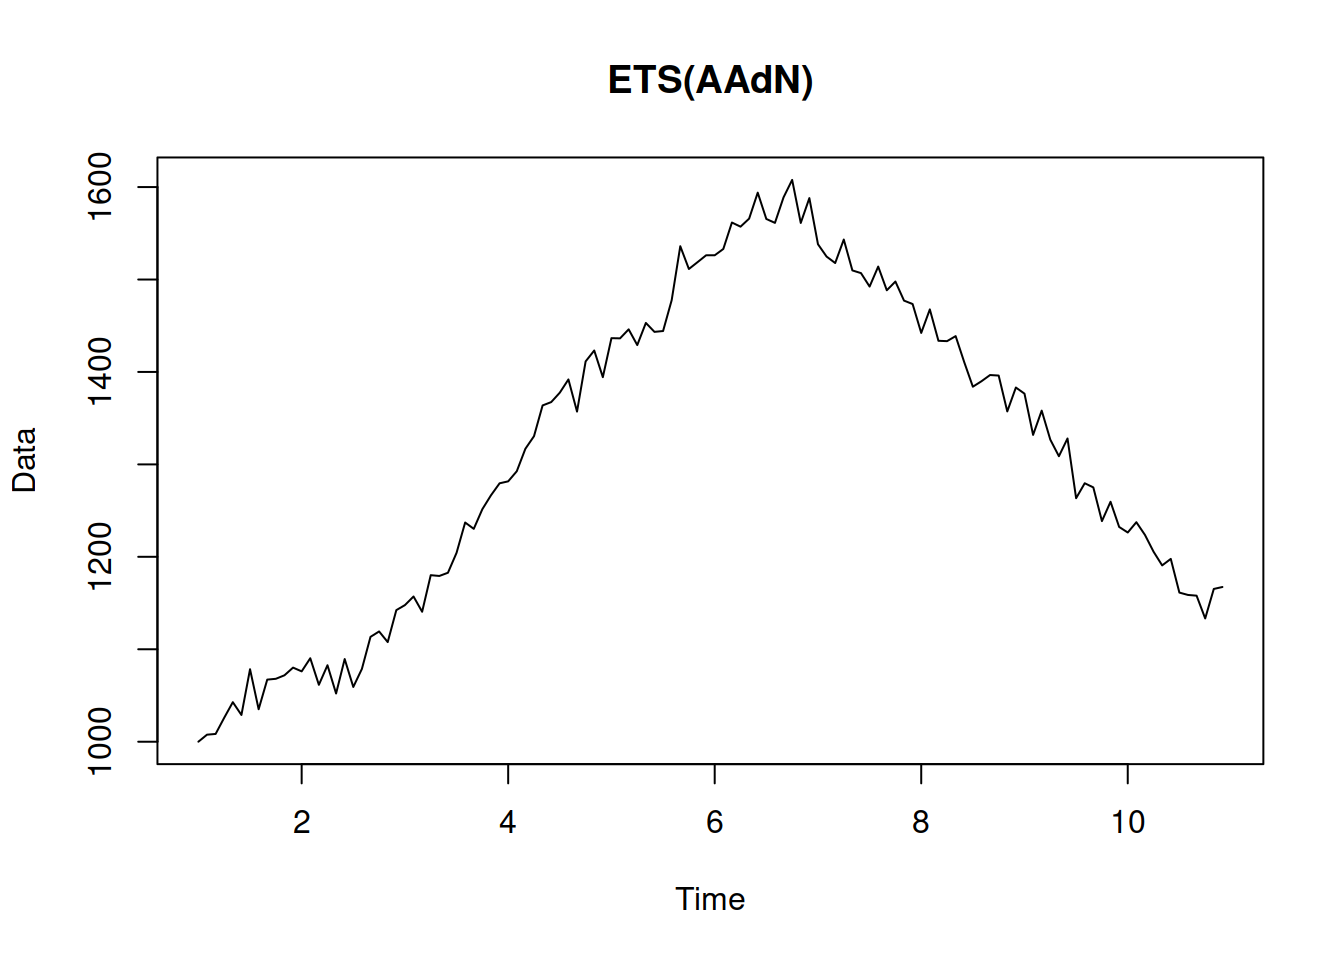 An example of ETS(A,Ad,N) data.